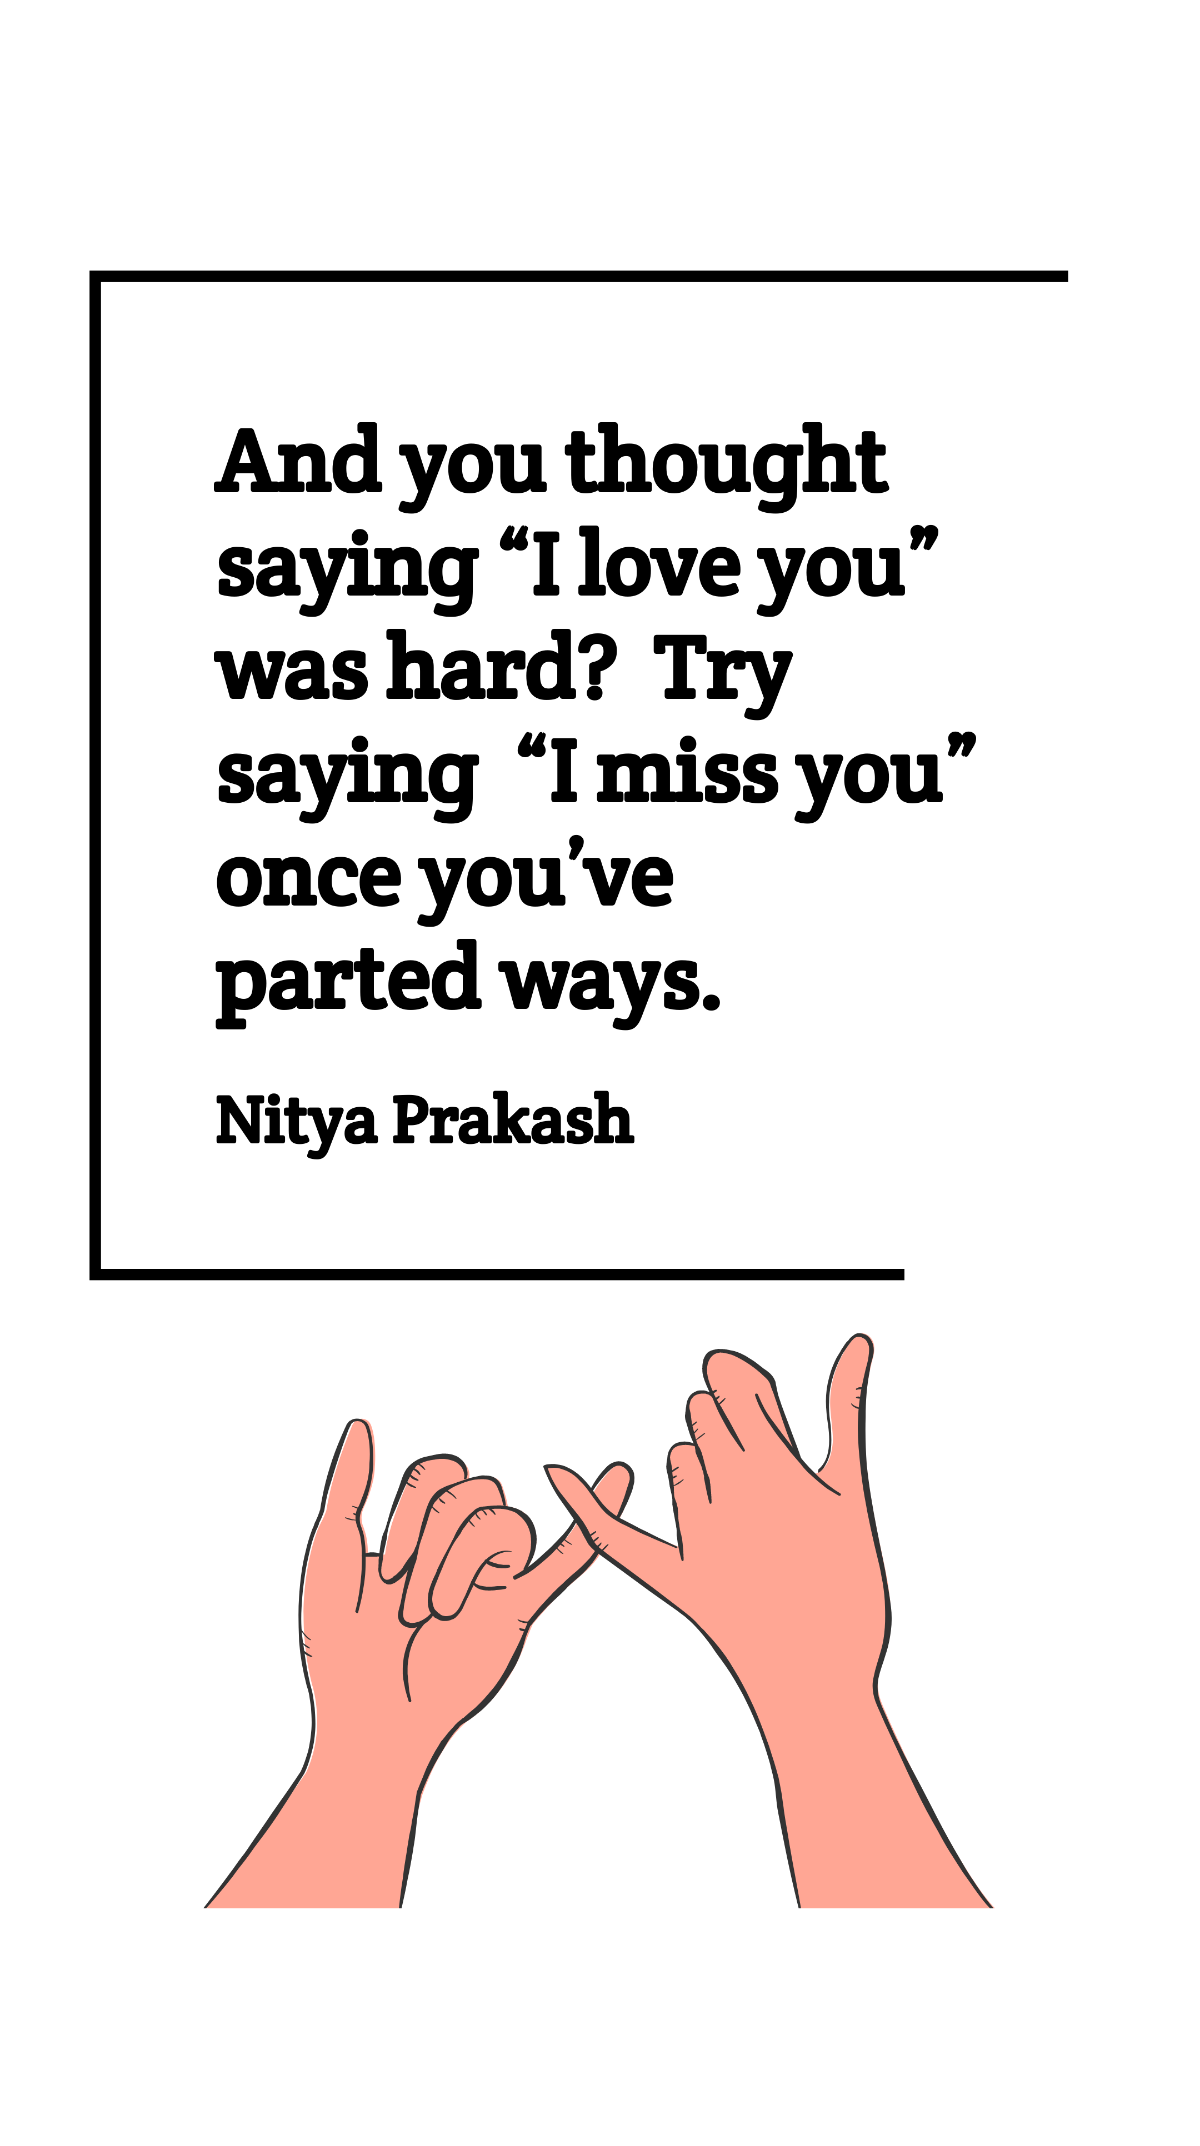 Nitya Prakash - And you thought saying “I love you” was hard? Try saying “I miss you” once you’ve parted ways. Template